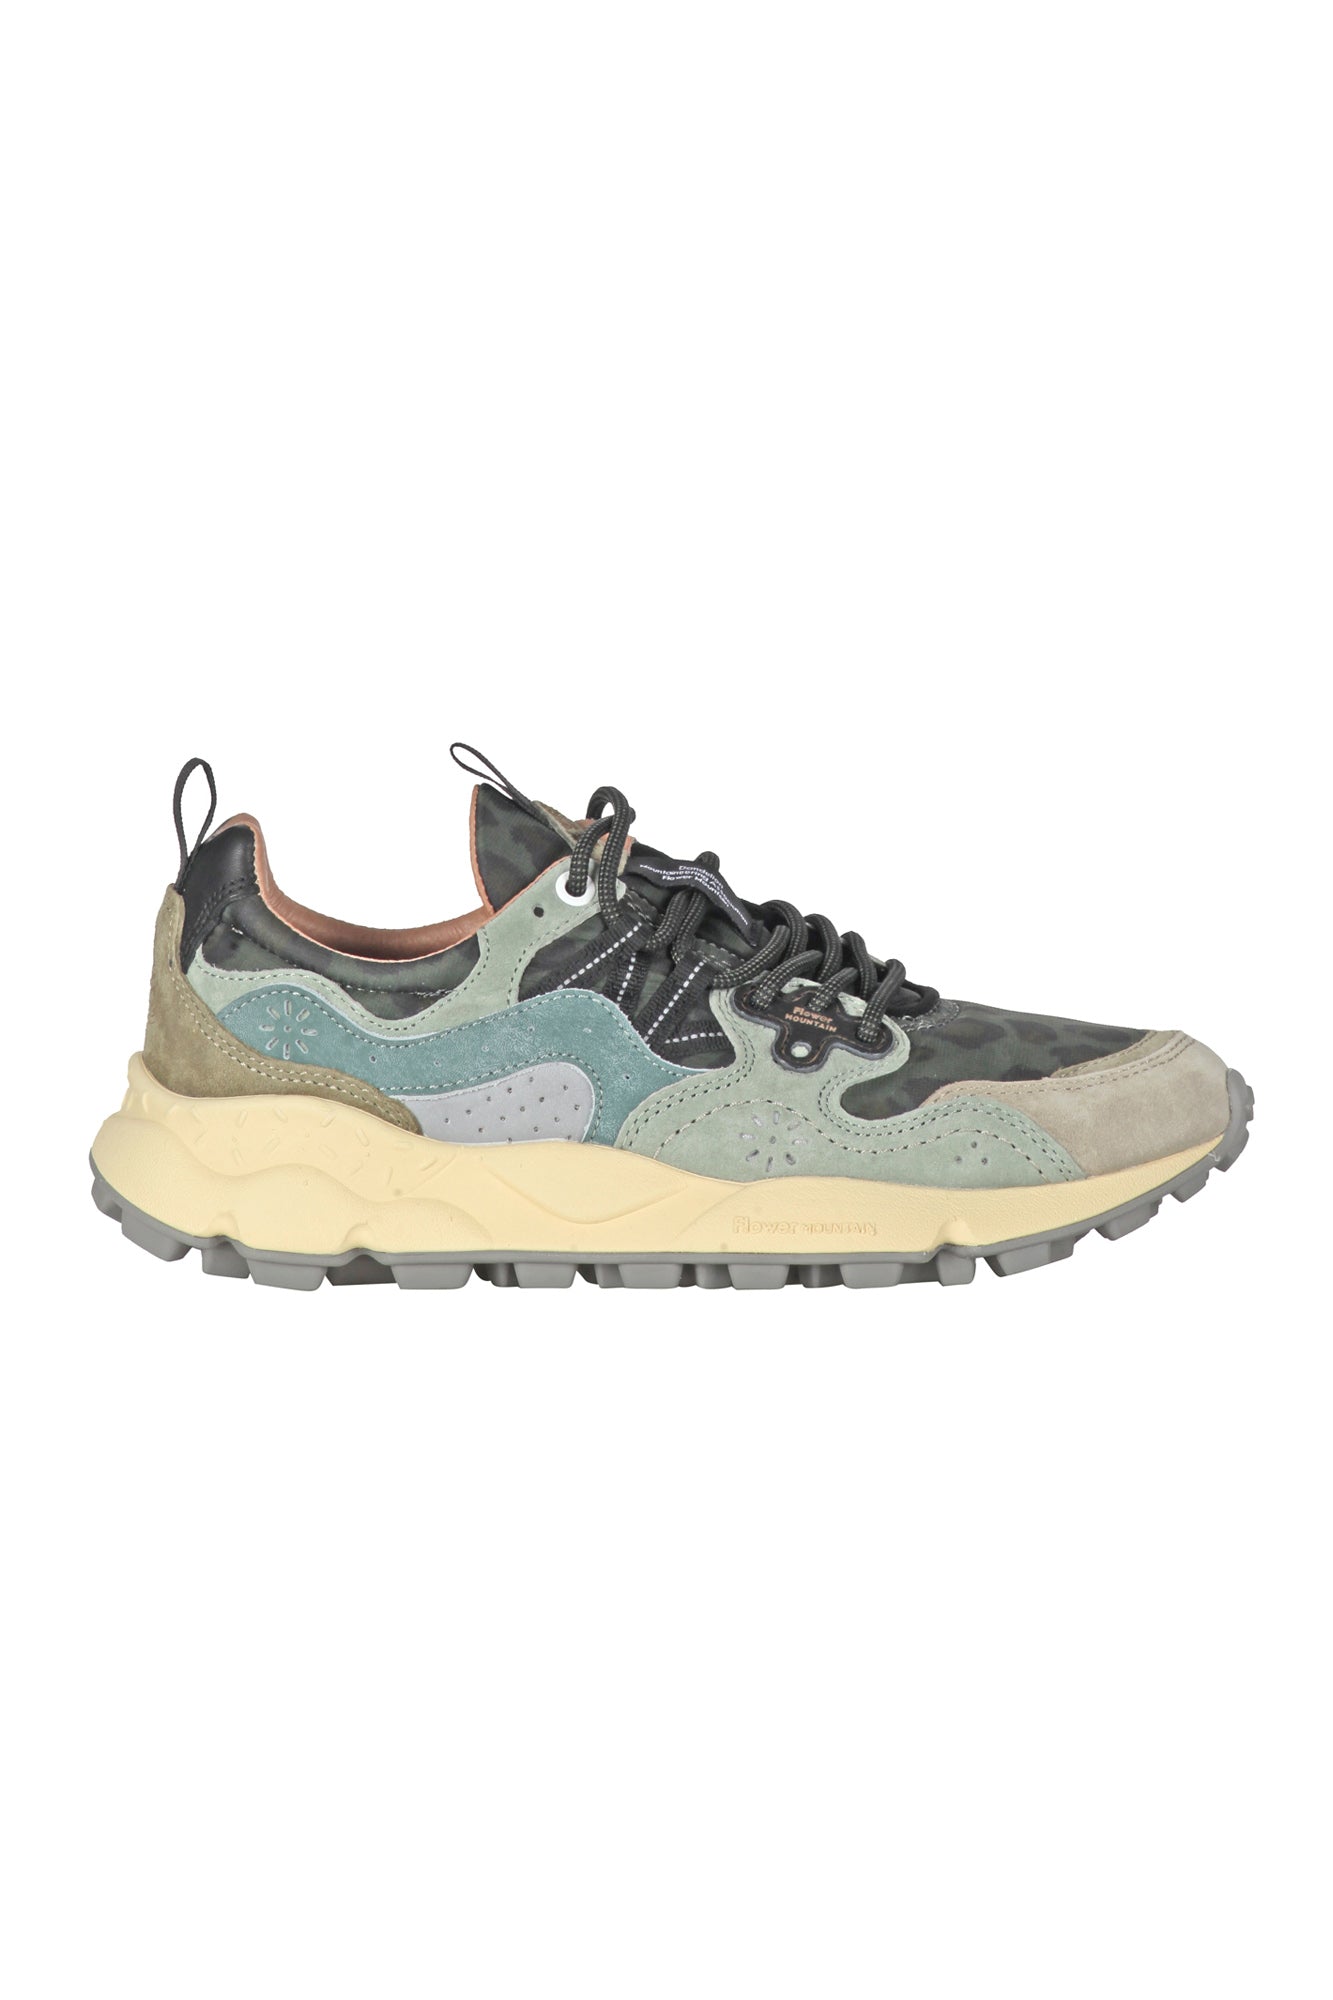 Flower Mountain - Sneakers - 430007 - Militare